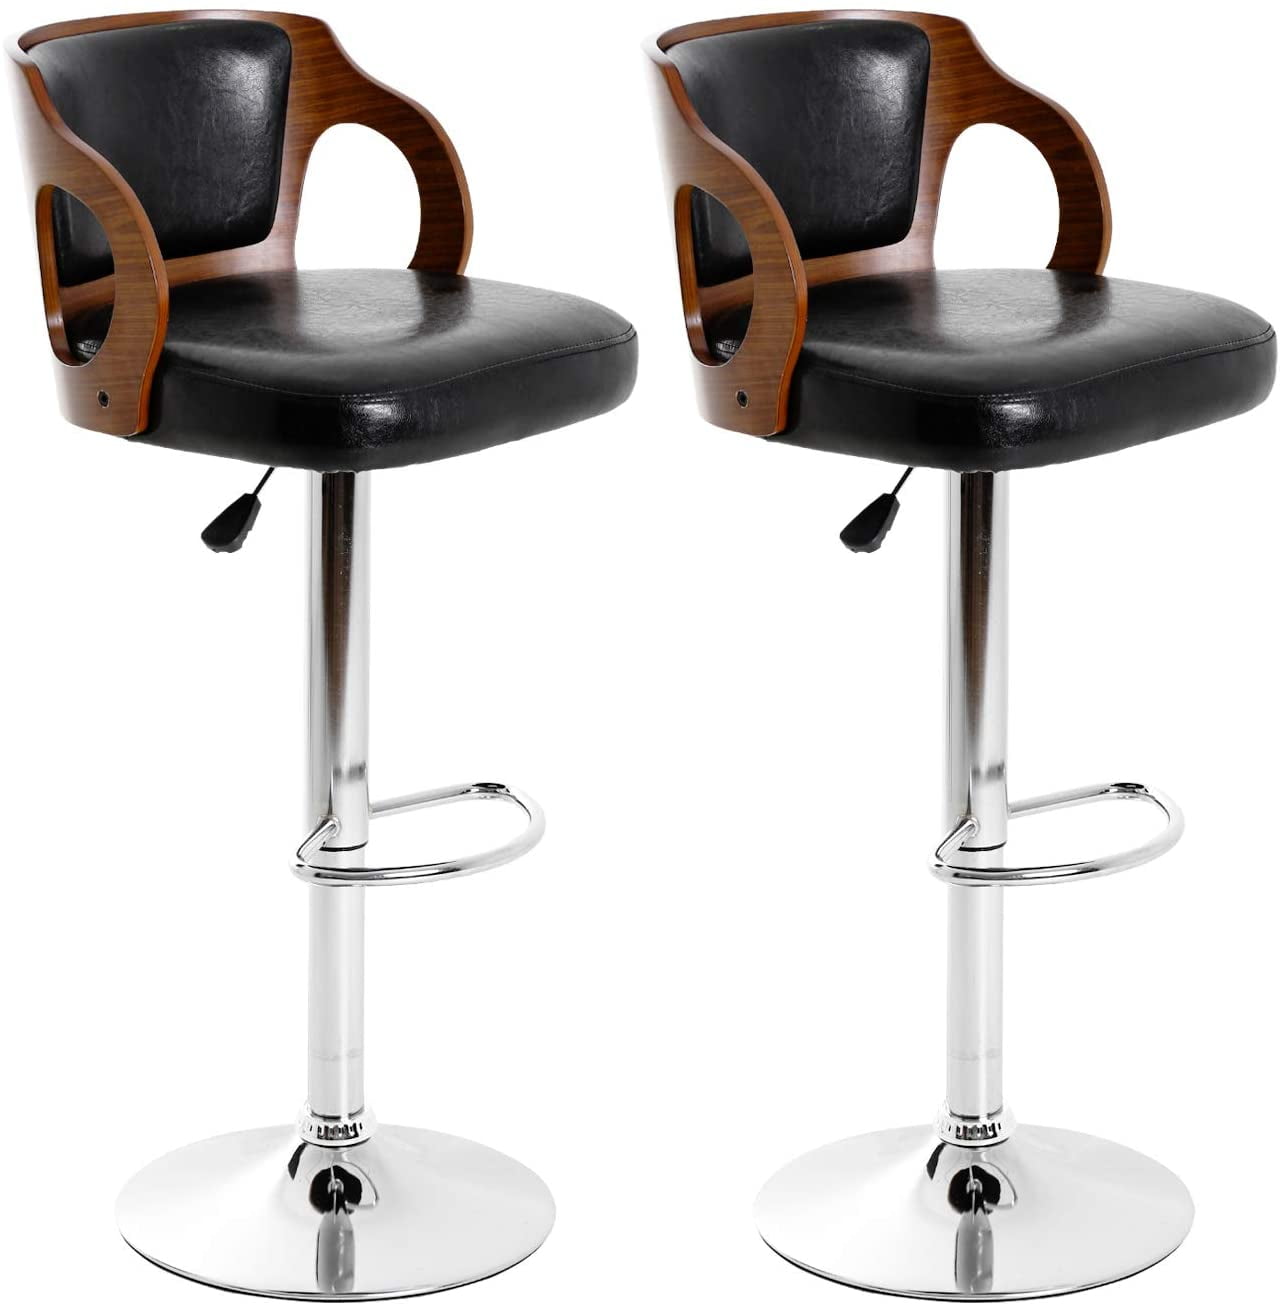 Set of 4 Bar Stools Modern Leather Swivel Hydraulic Home Dinning Chairs Bistro 